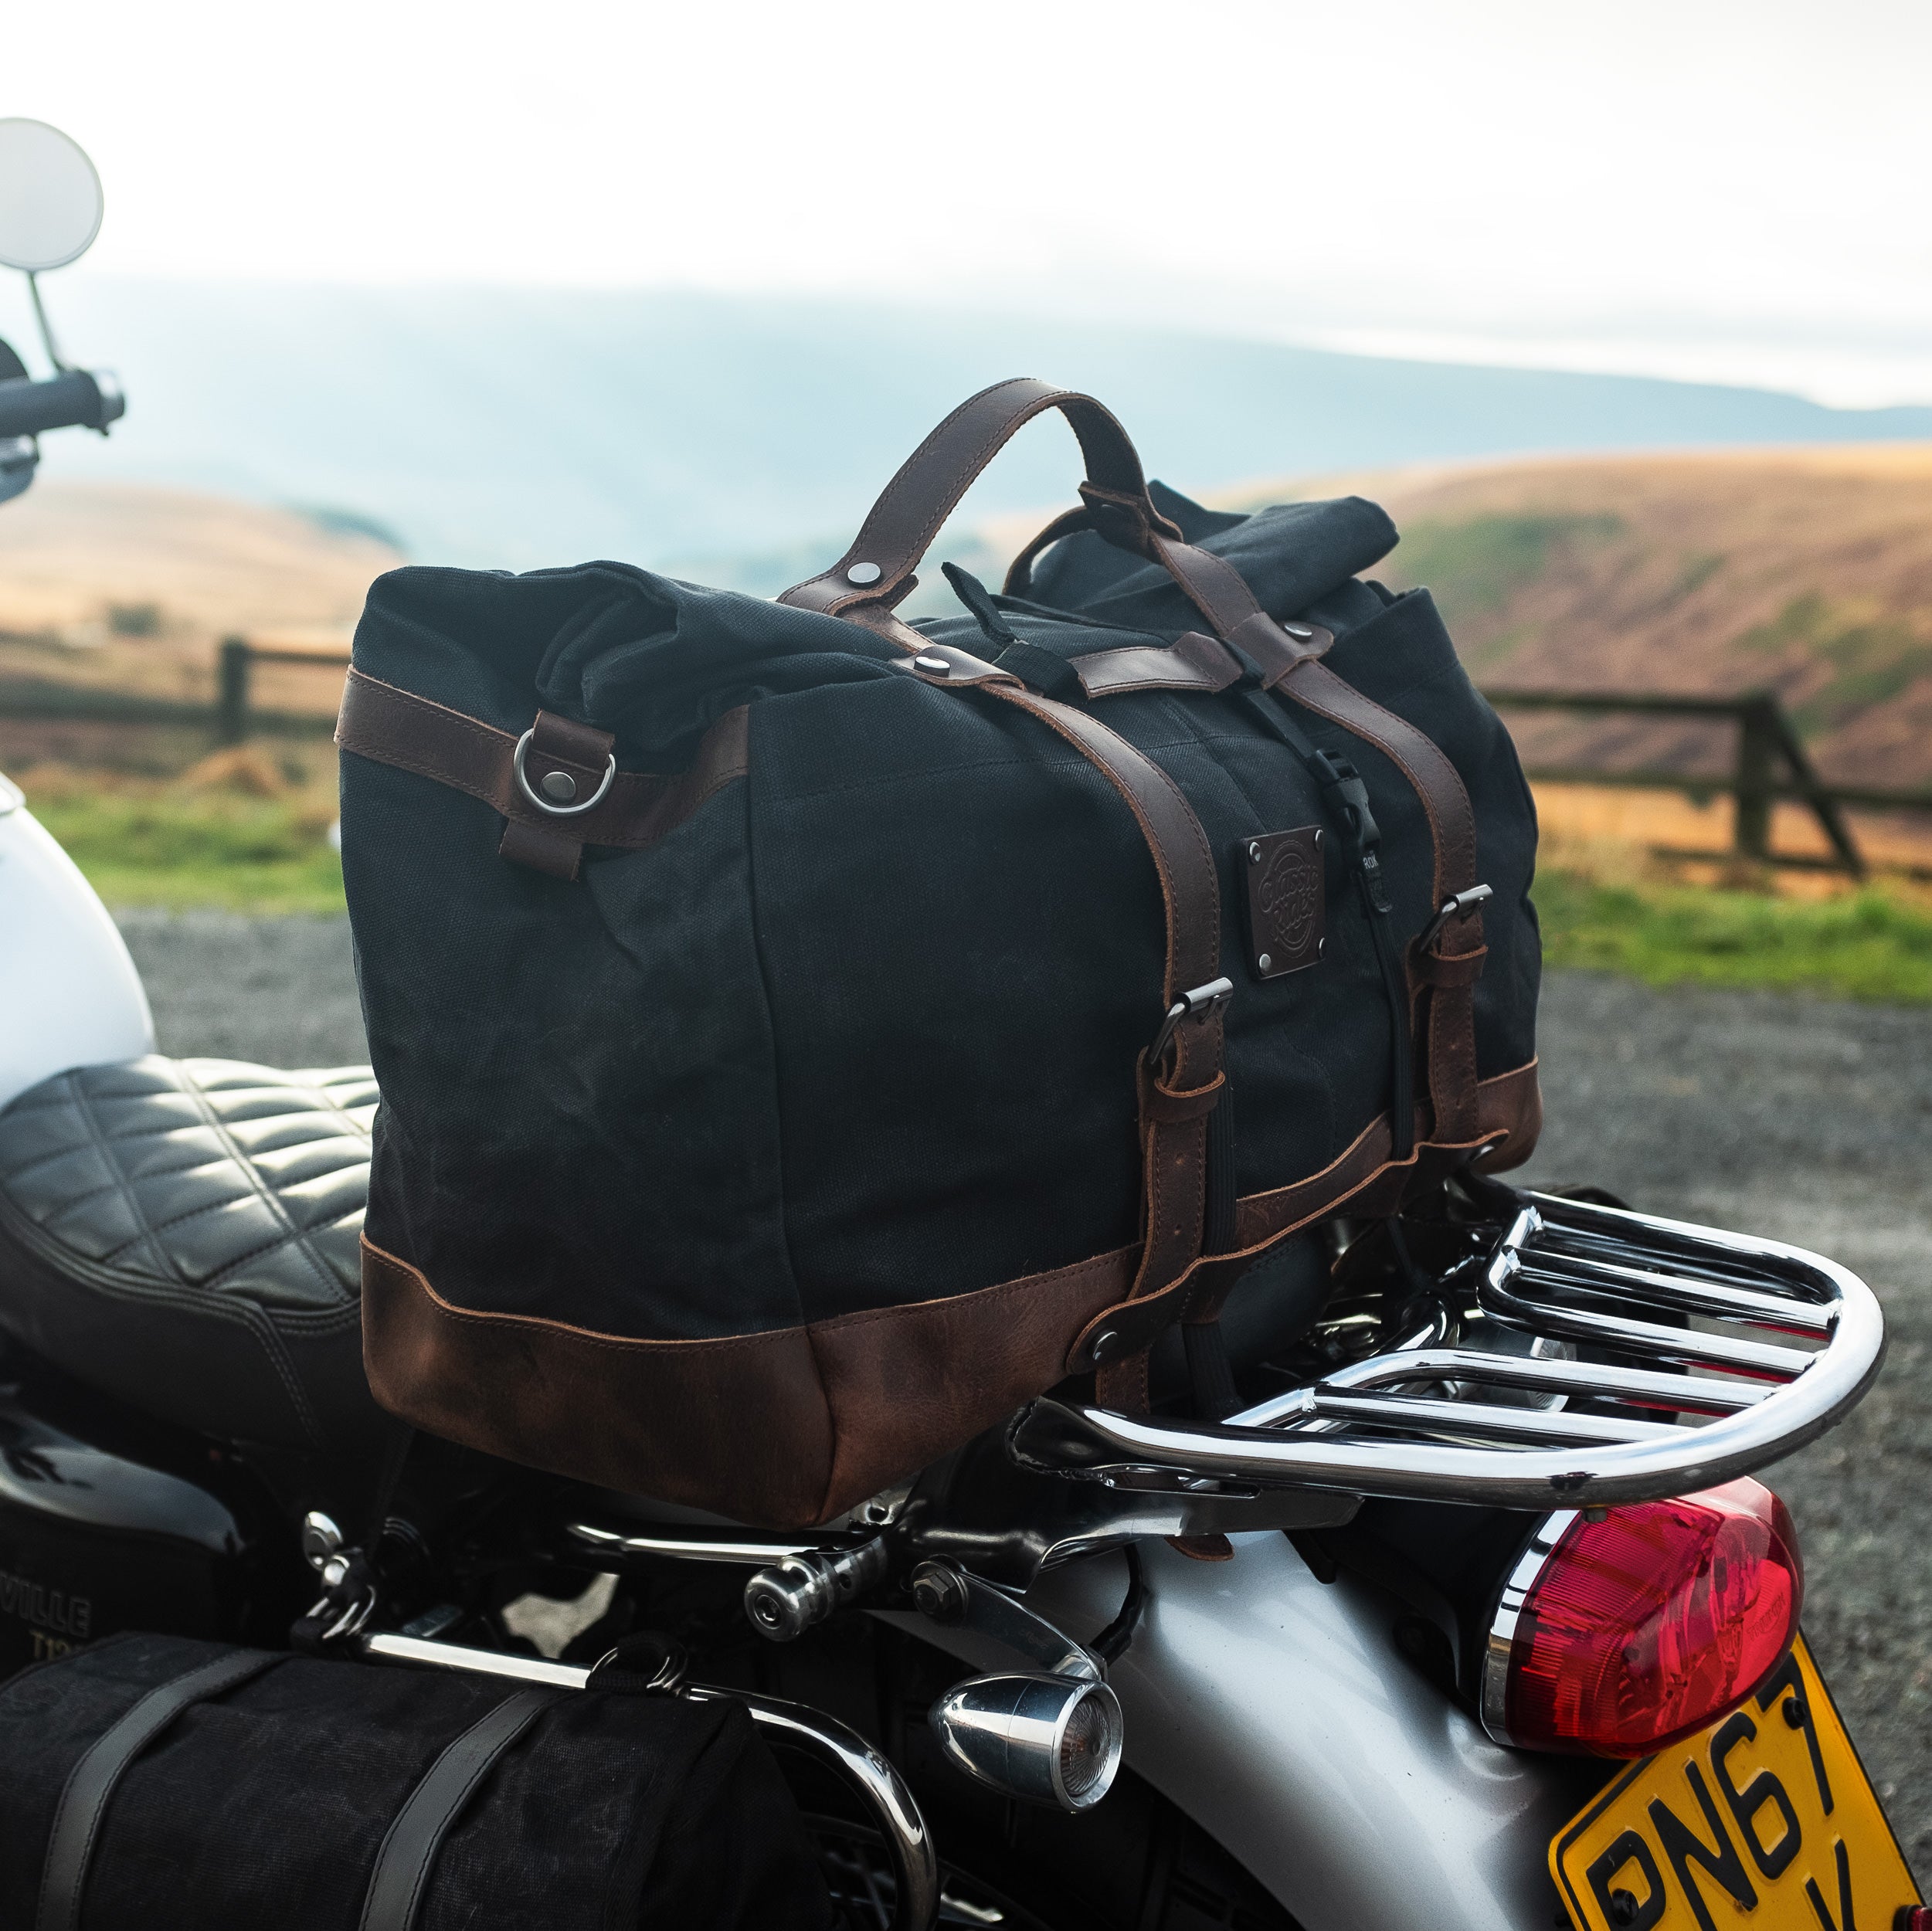 The Bike Bag - high quality bicycle bags that require no disassembling -  cycle bag storage